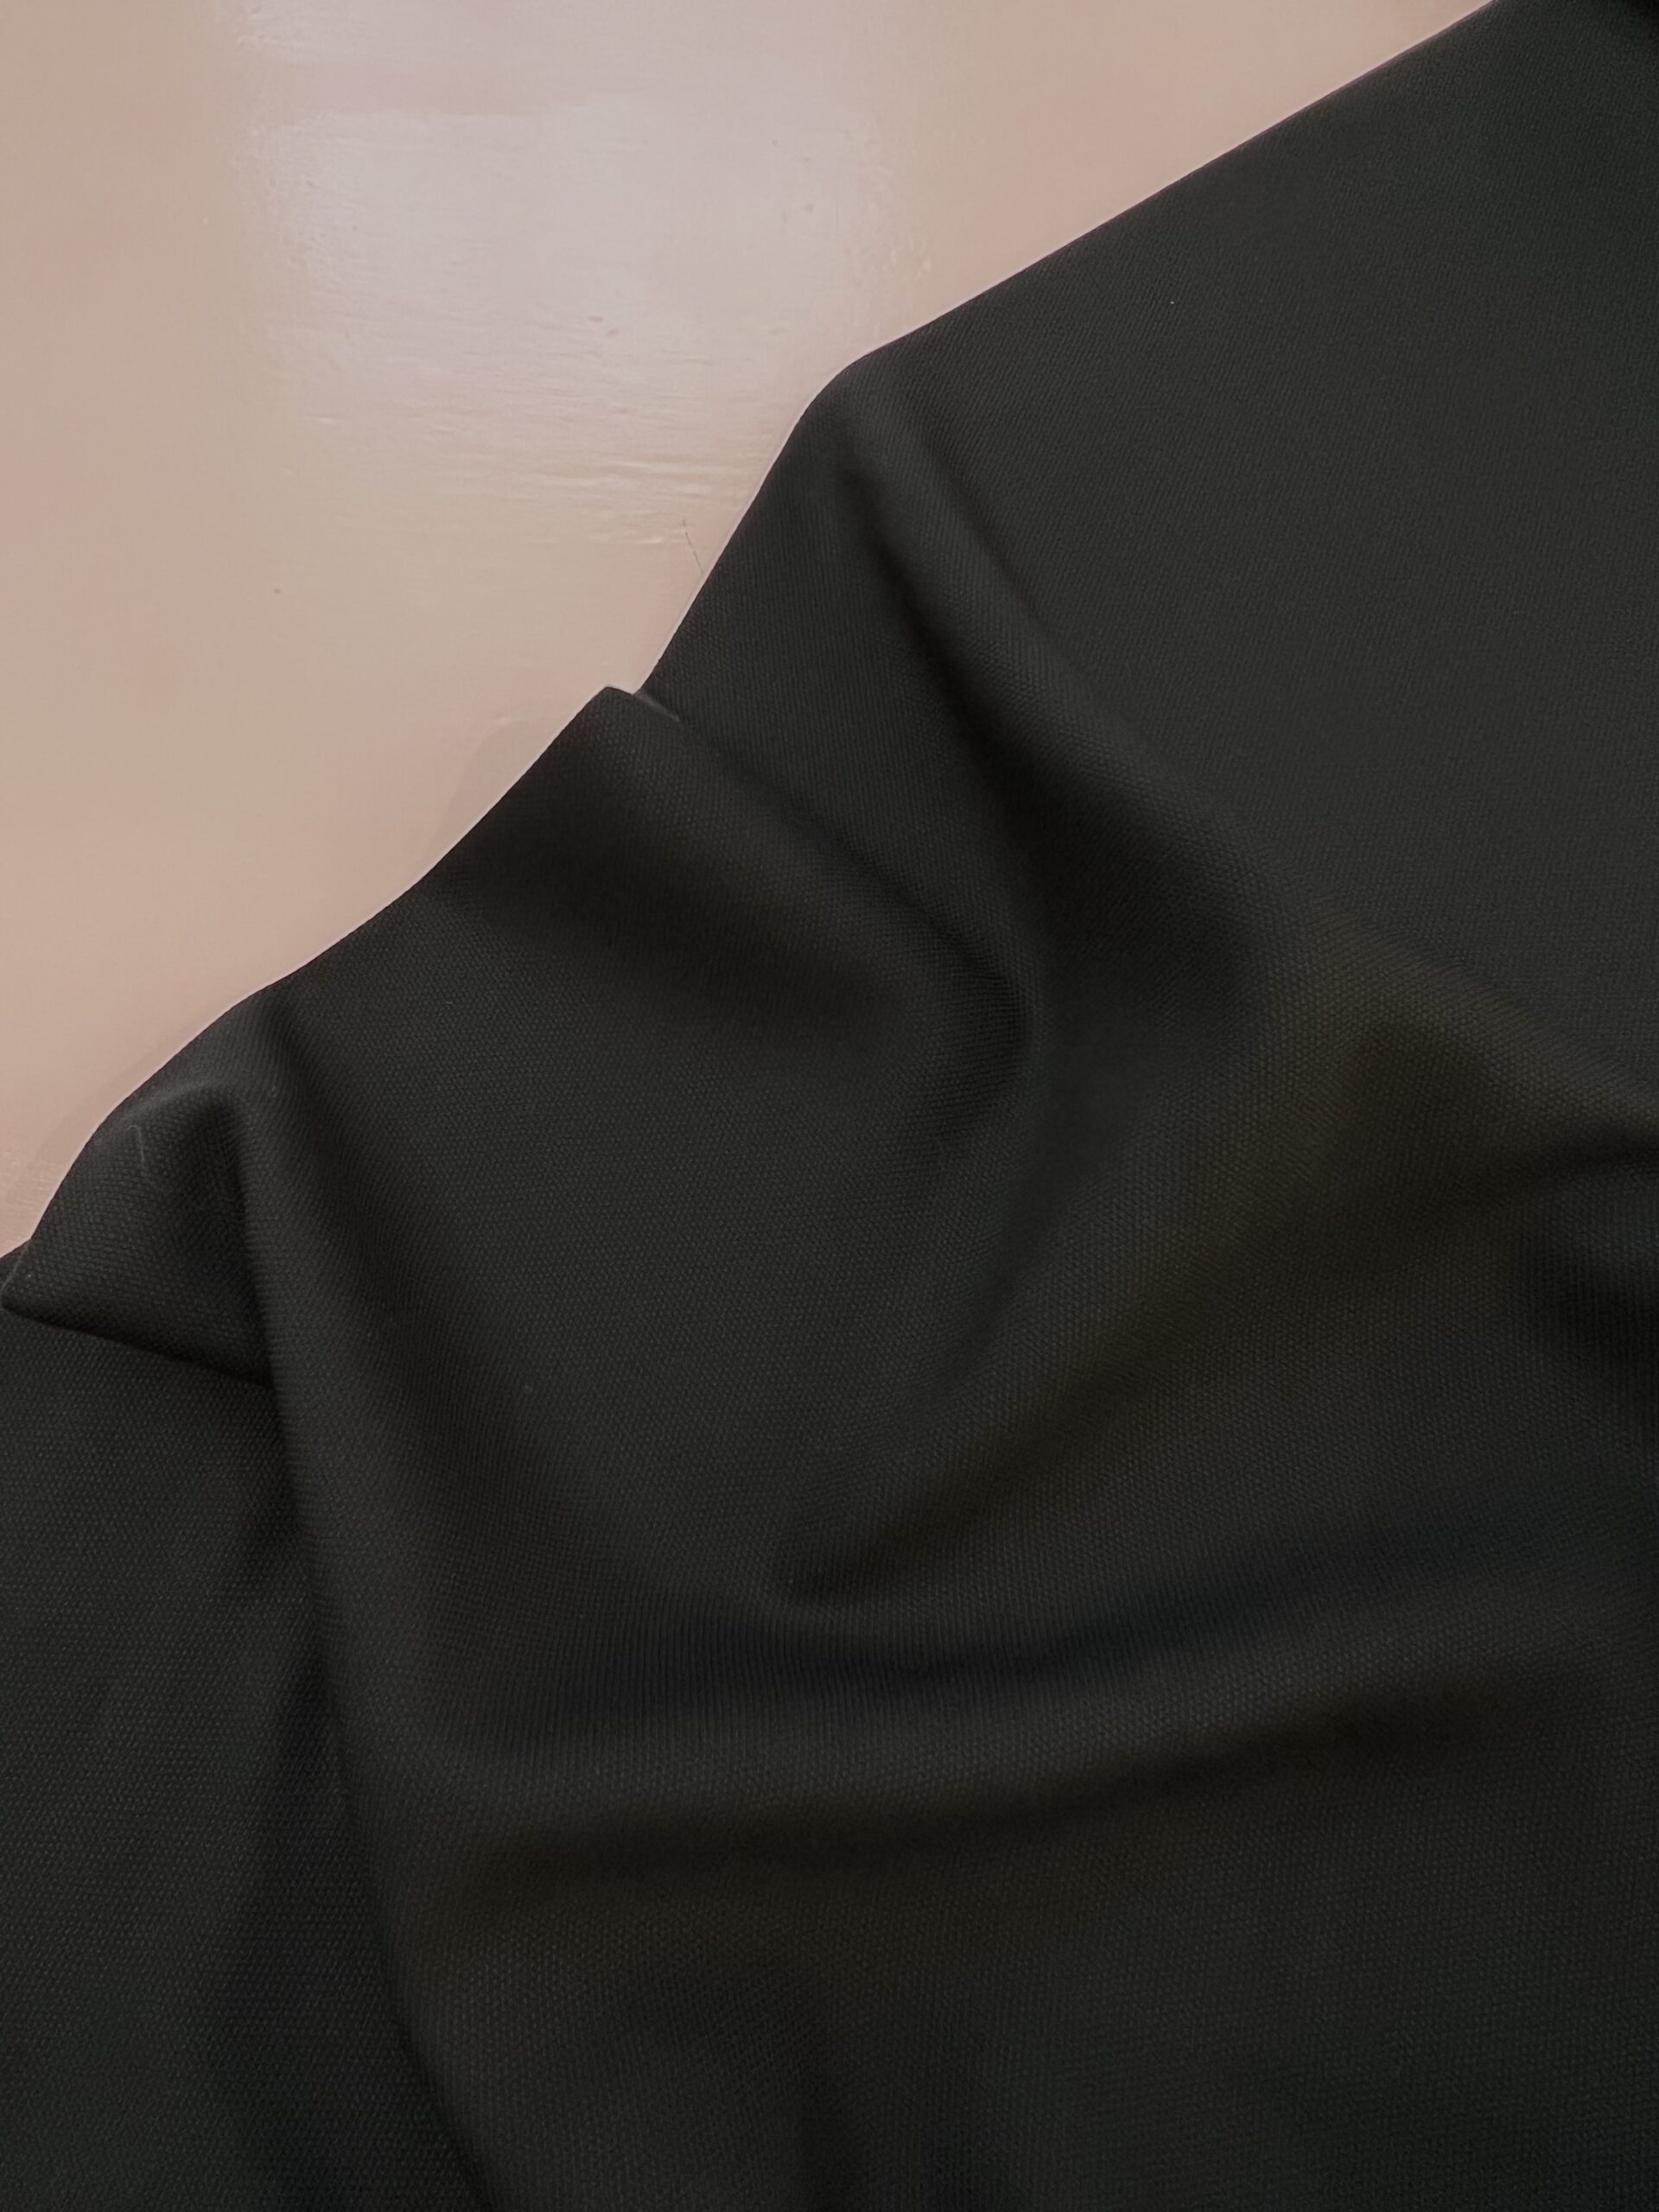 Black Viscose Twill 1.5 Metre Remnant – The Fabric Boutique